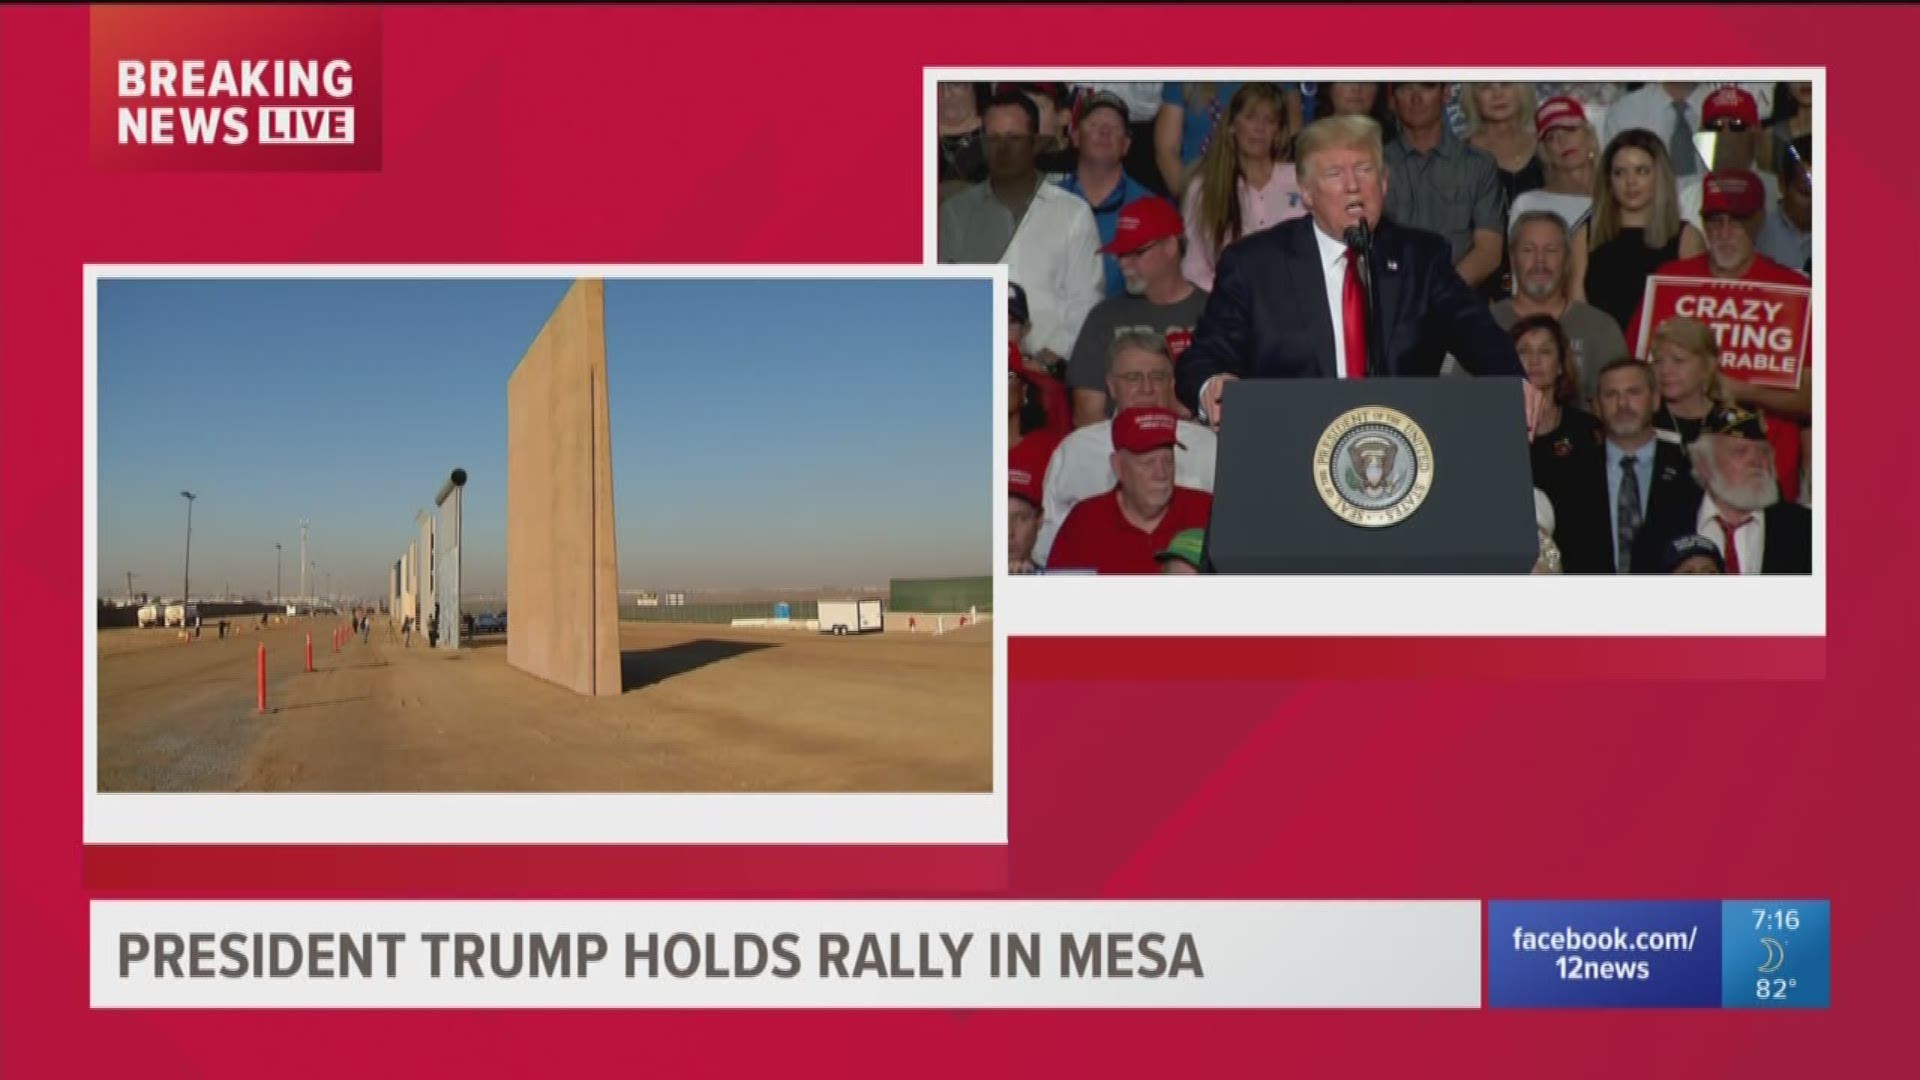 At a rally in Mesa President Trump claimed that Democrats want open borders and chain migration. He declared that there would be a wall despite Democrat's disapproving.